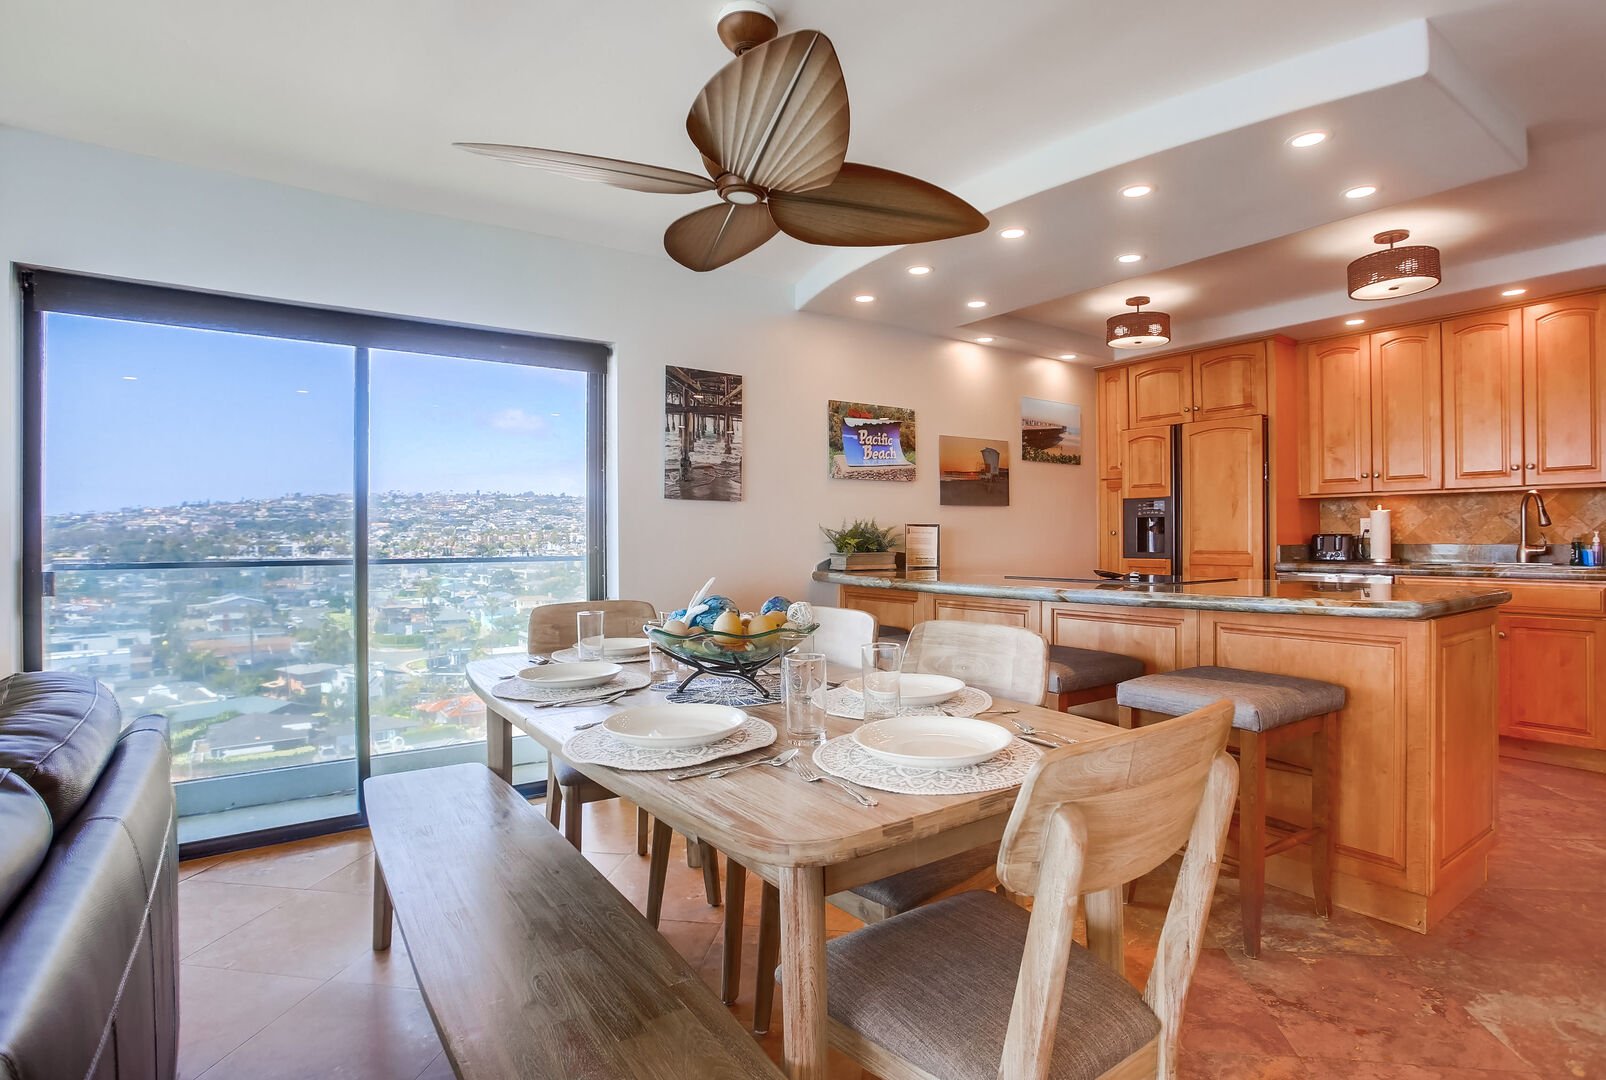 Dining room adjacent from the fully equipped kitchen with seating for 4 guests at the breakfast bar and 6-8 at the dining table. Side balcony views of north PB and the ocean!